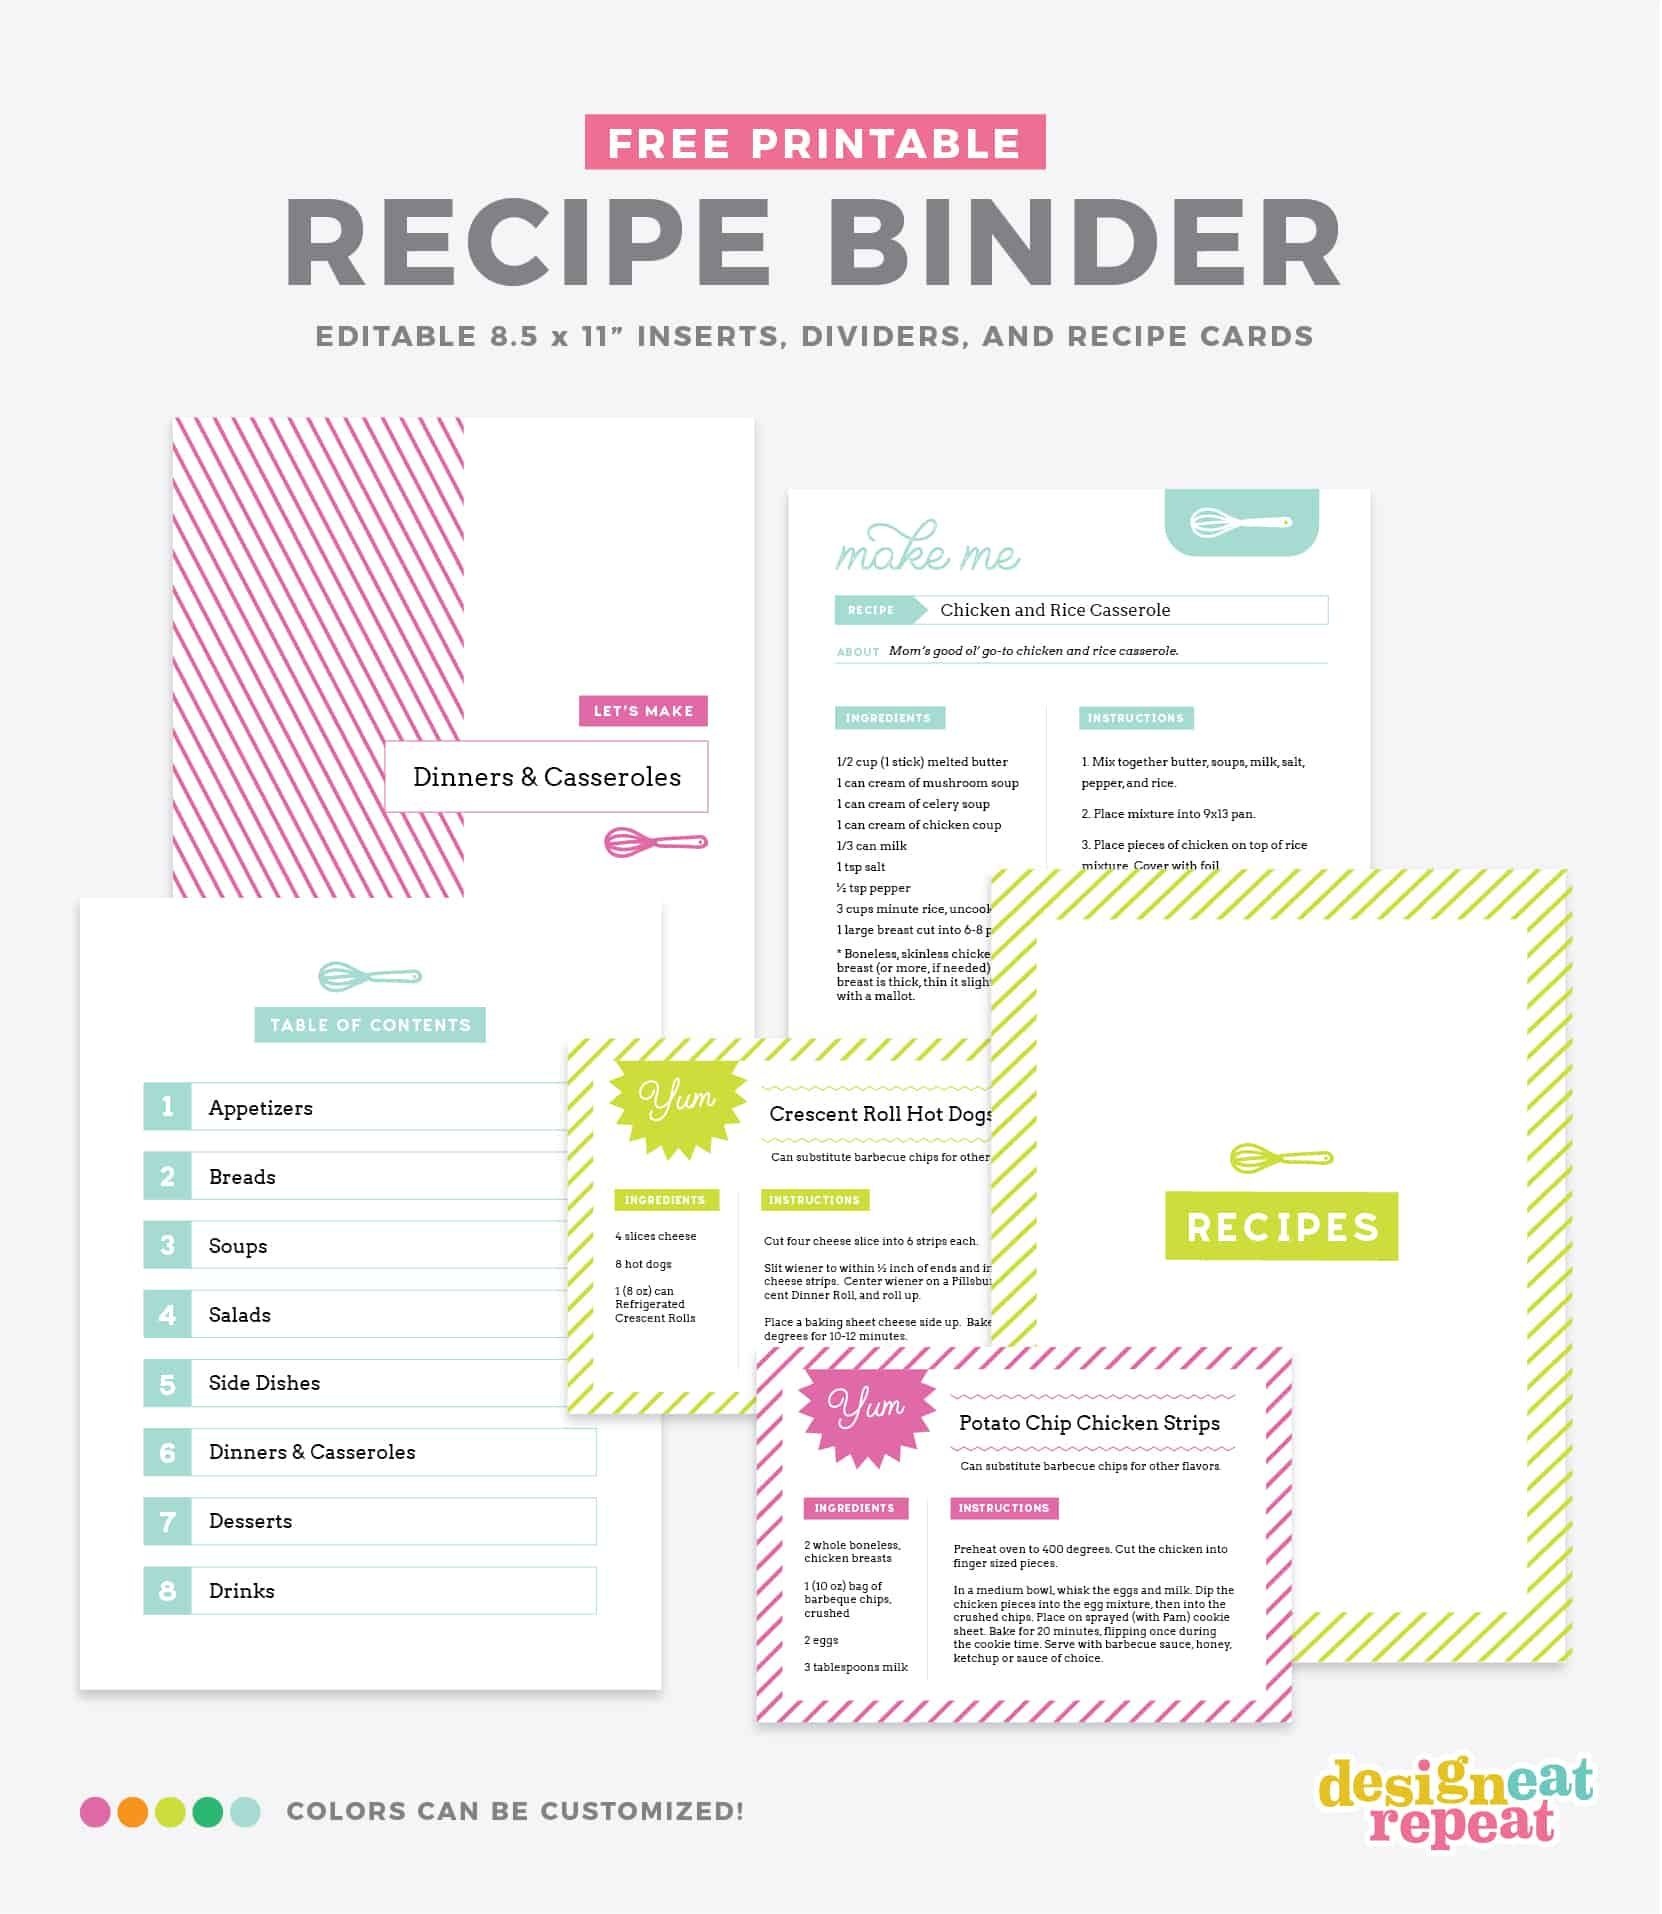 Organize Your Favorite Recipes Into A Diy Recipe Book With These Fun - Free Printable Recipe Binder Templates